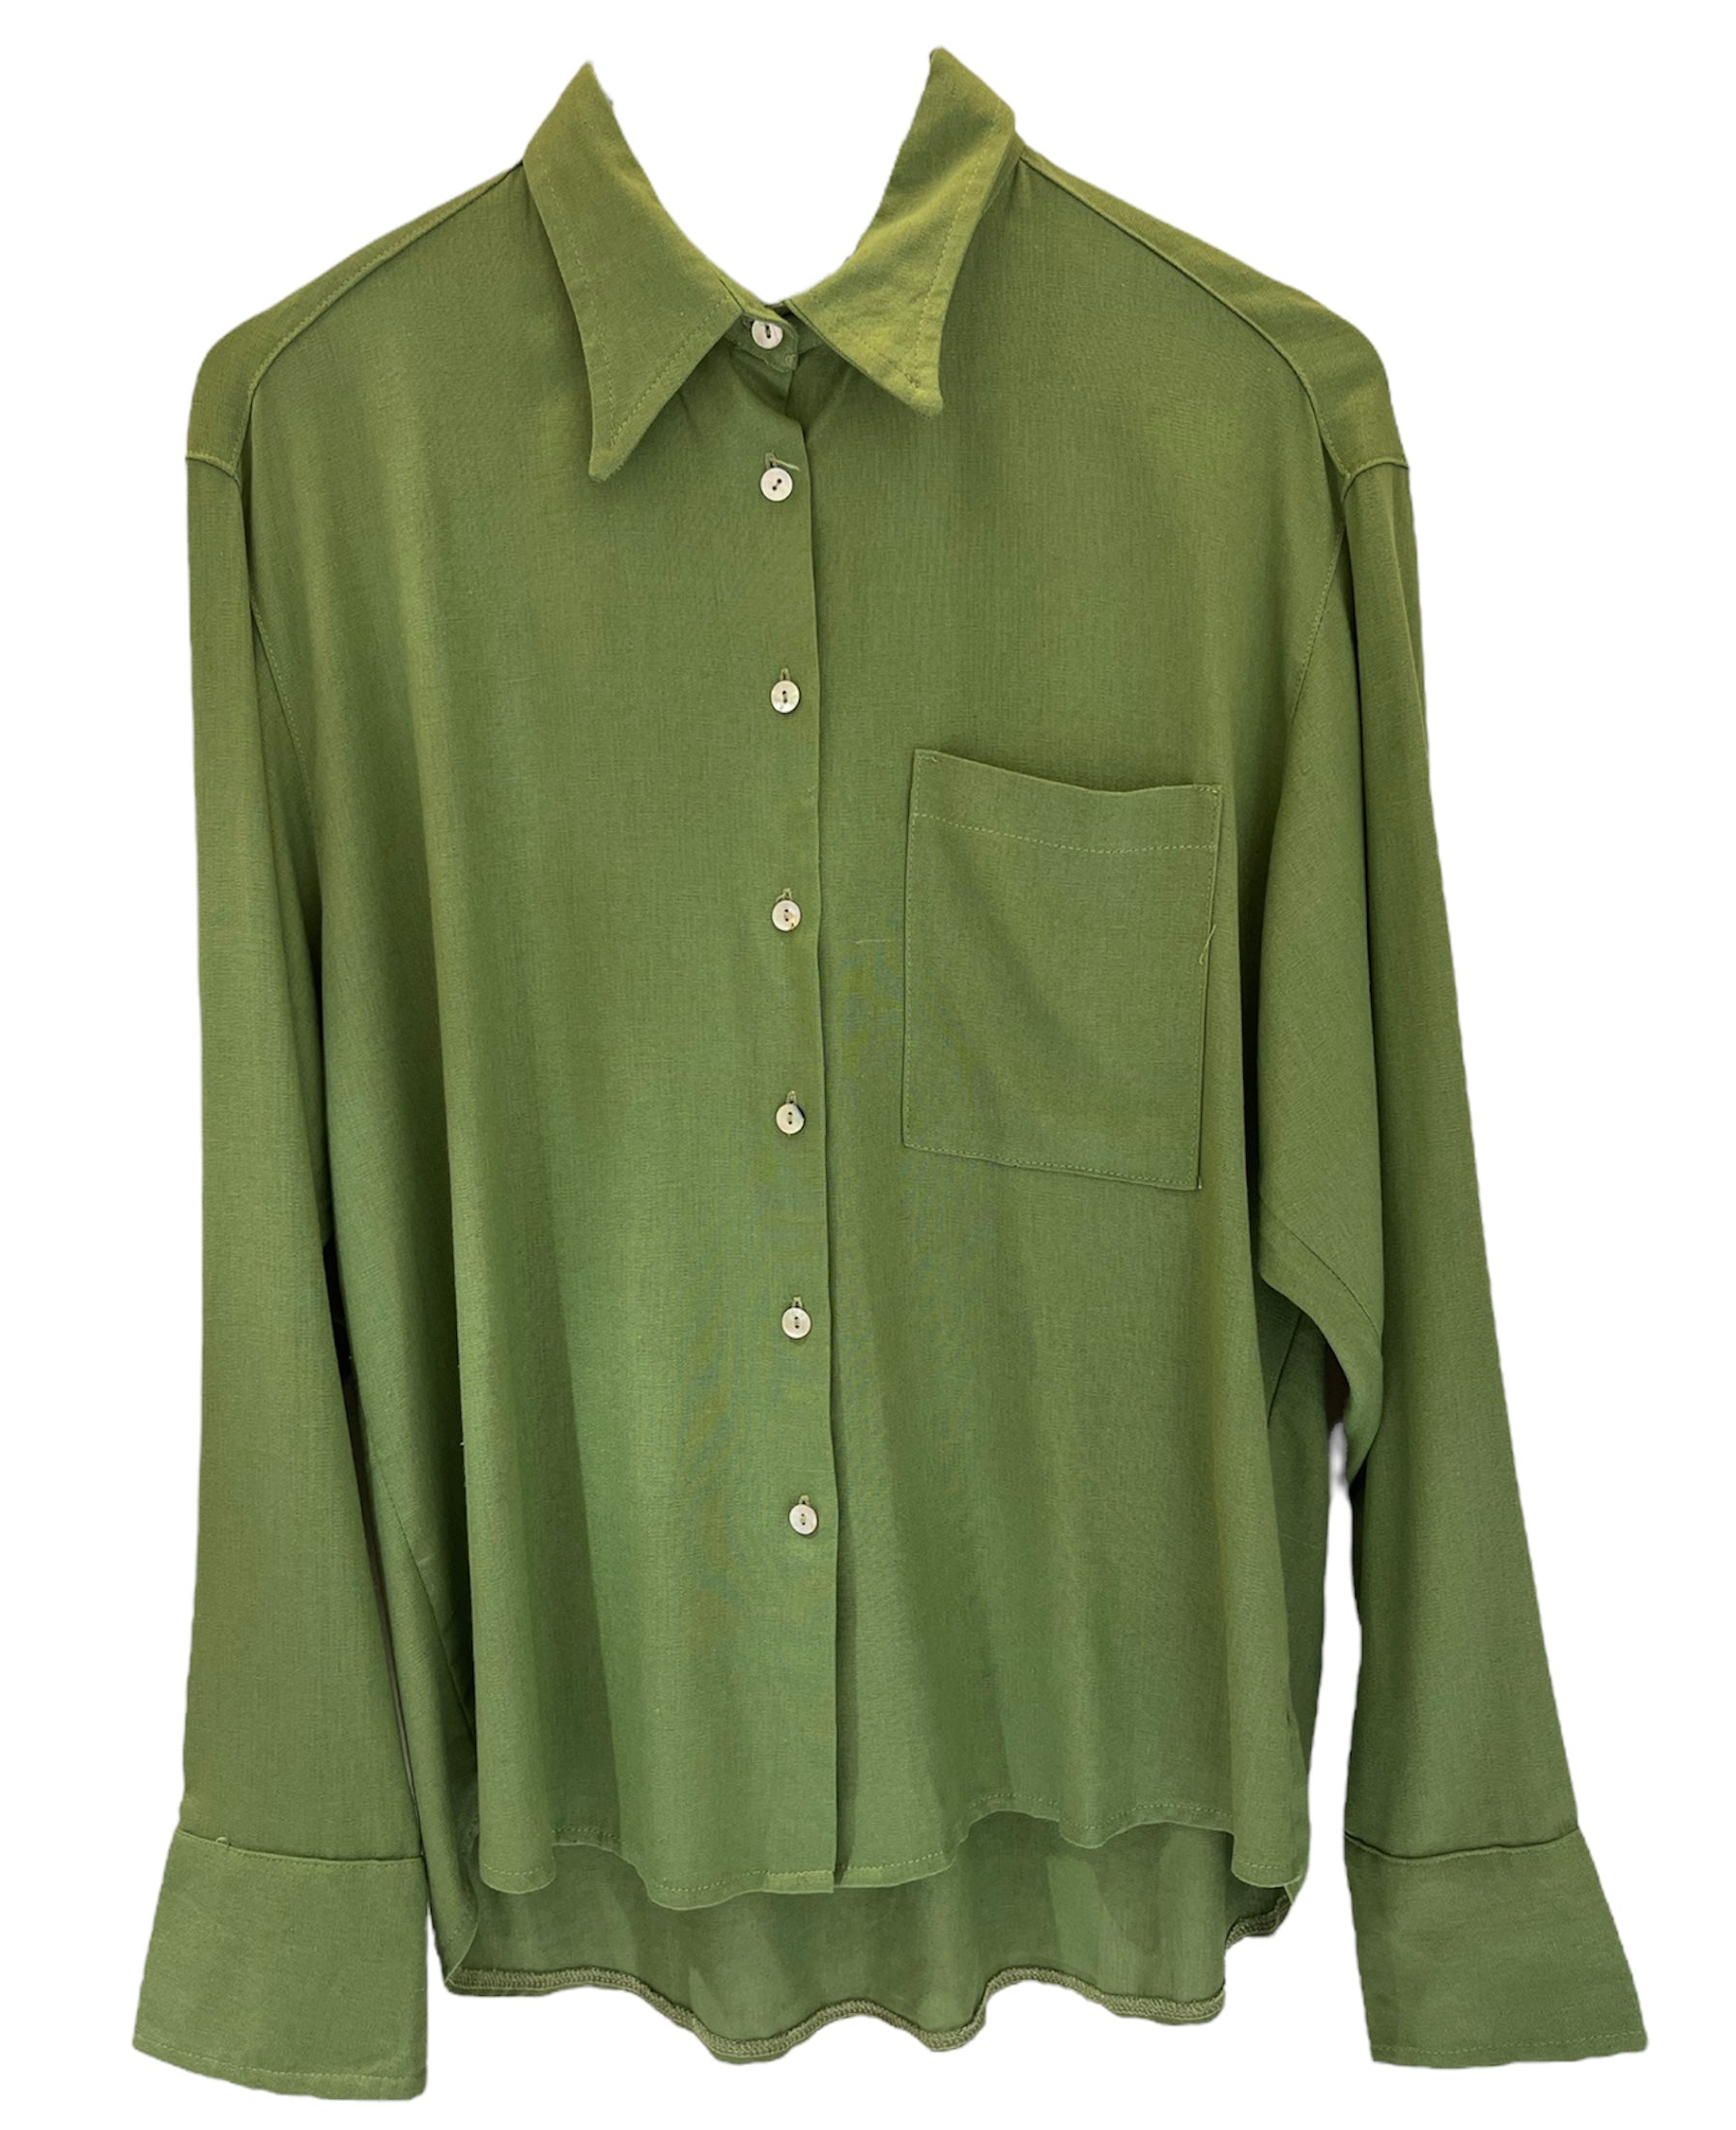 Olive & Oak shirt Green Size XL - $13 (13% Off Retail) - From ivy